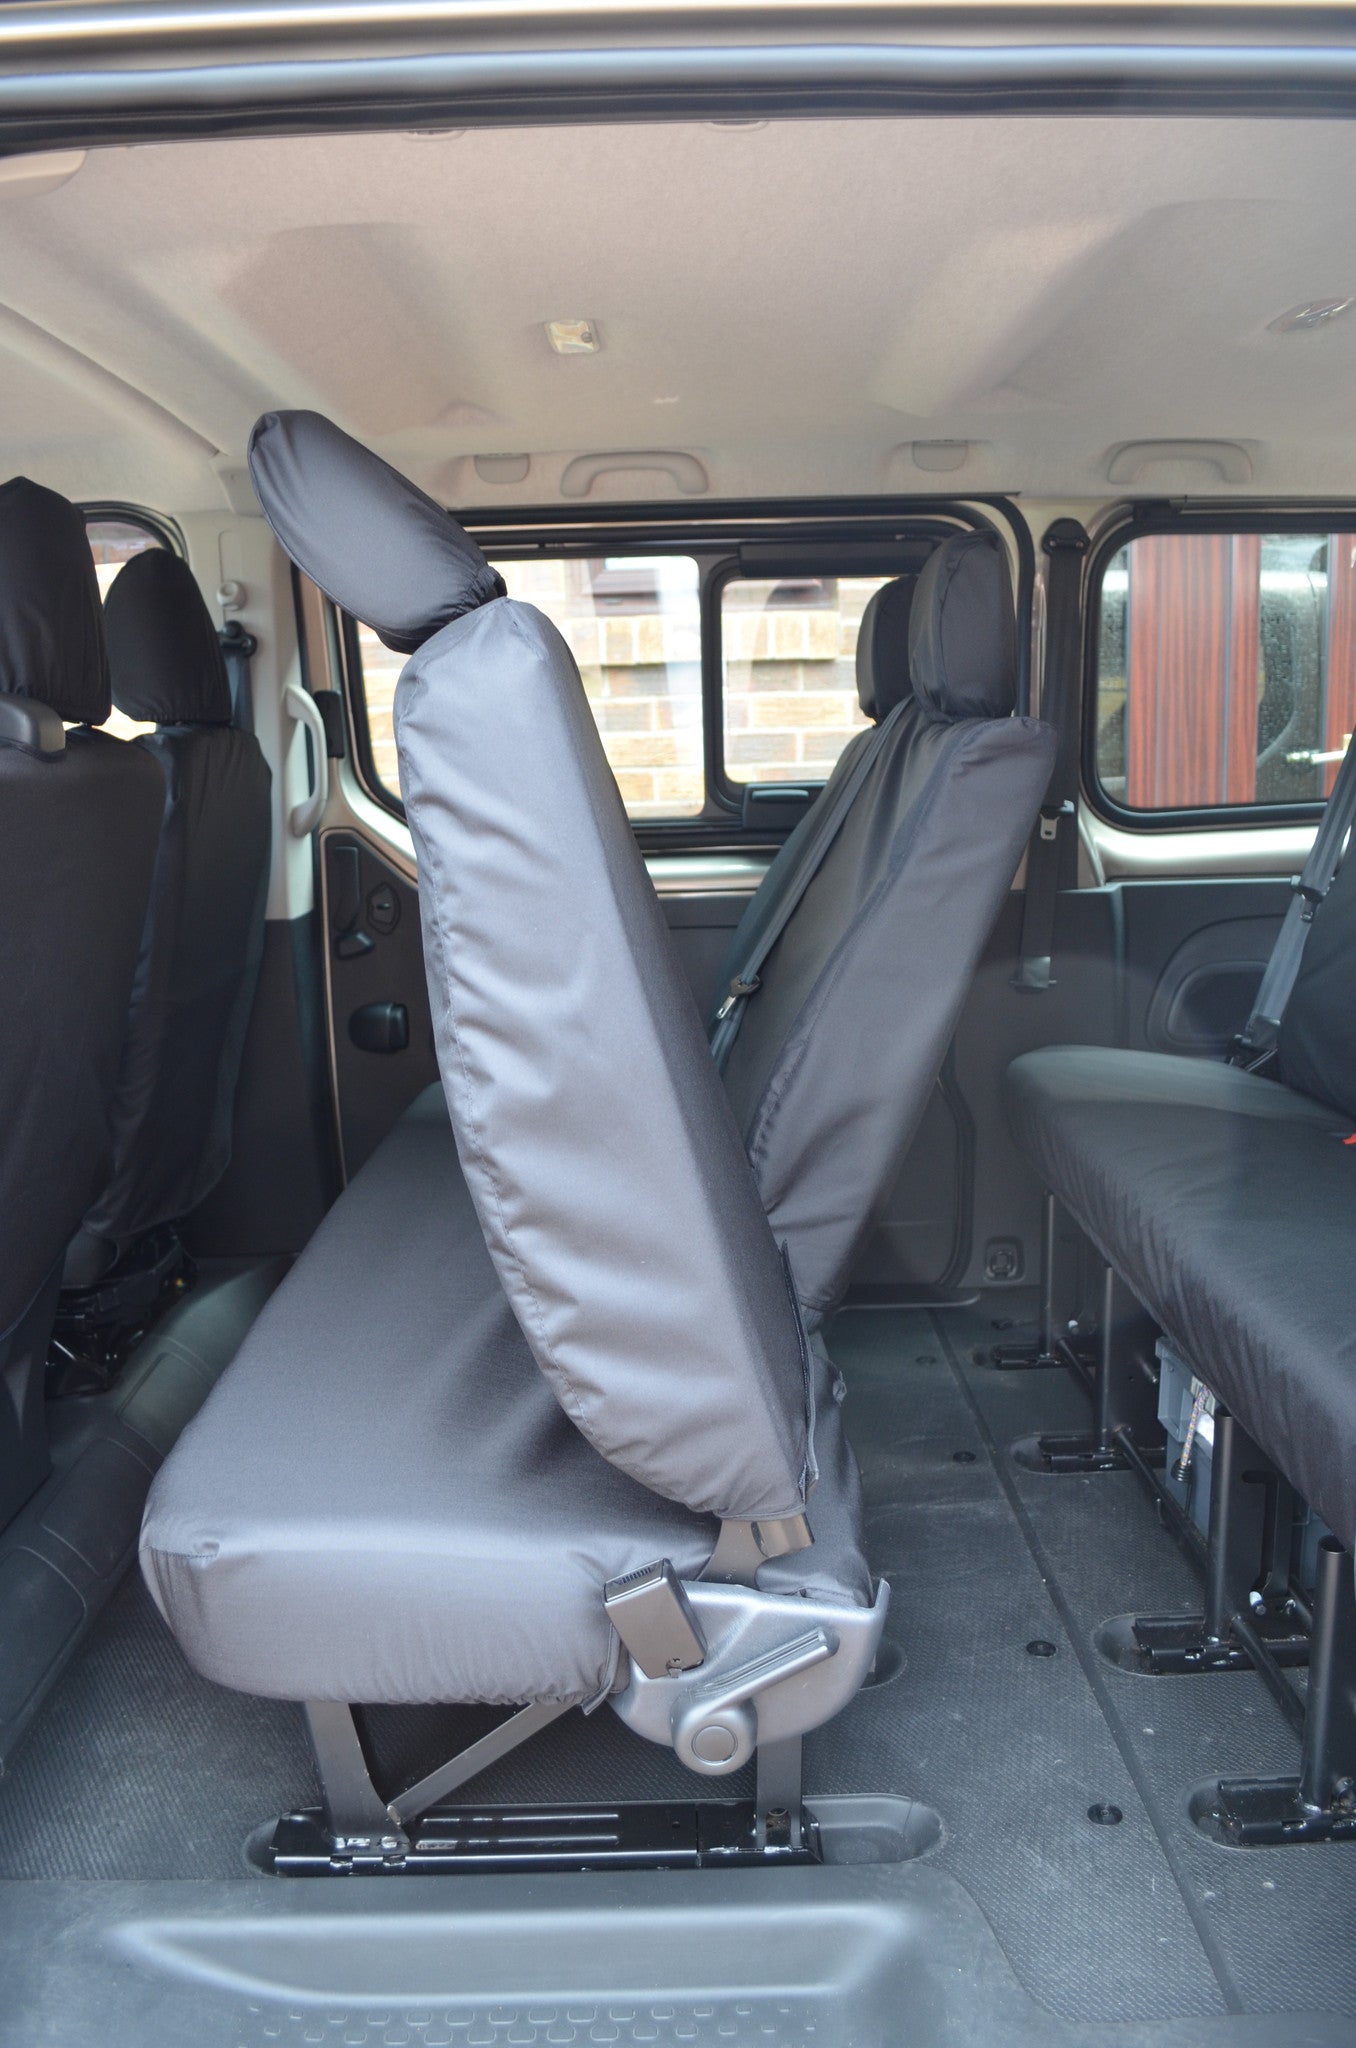 Renault Trafic Passenger 2006 - 2014 Seat Covers Black / 2nd Row Rear Turtle Covers Ltd